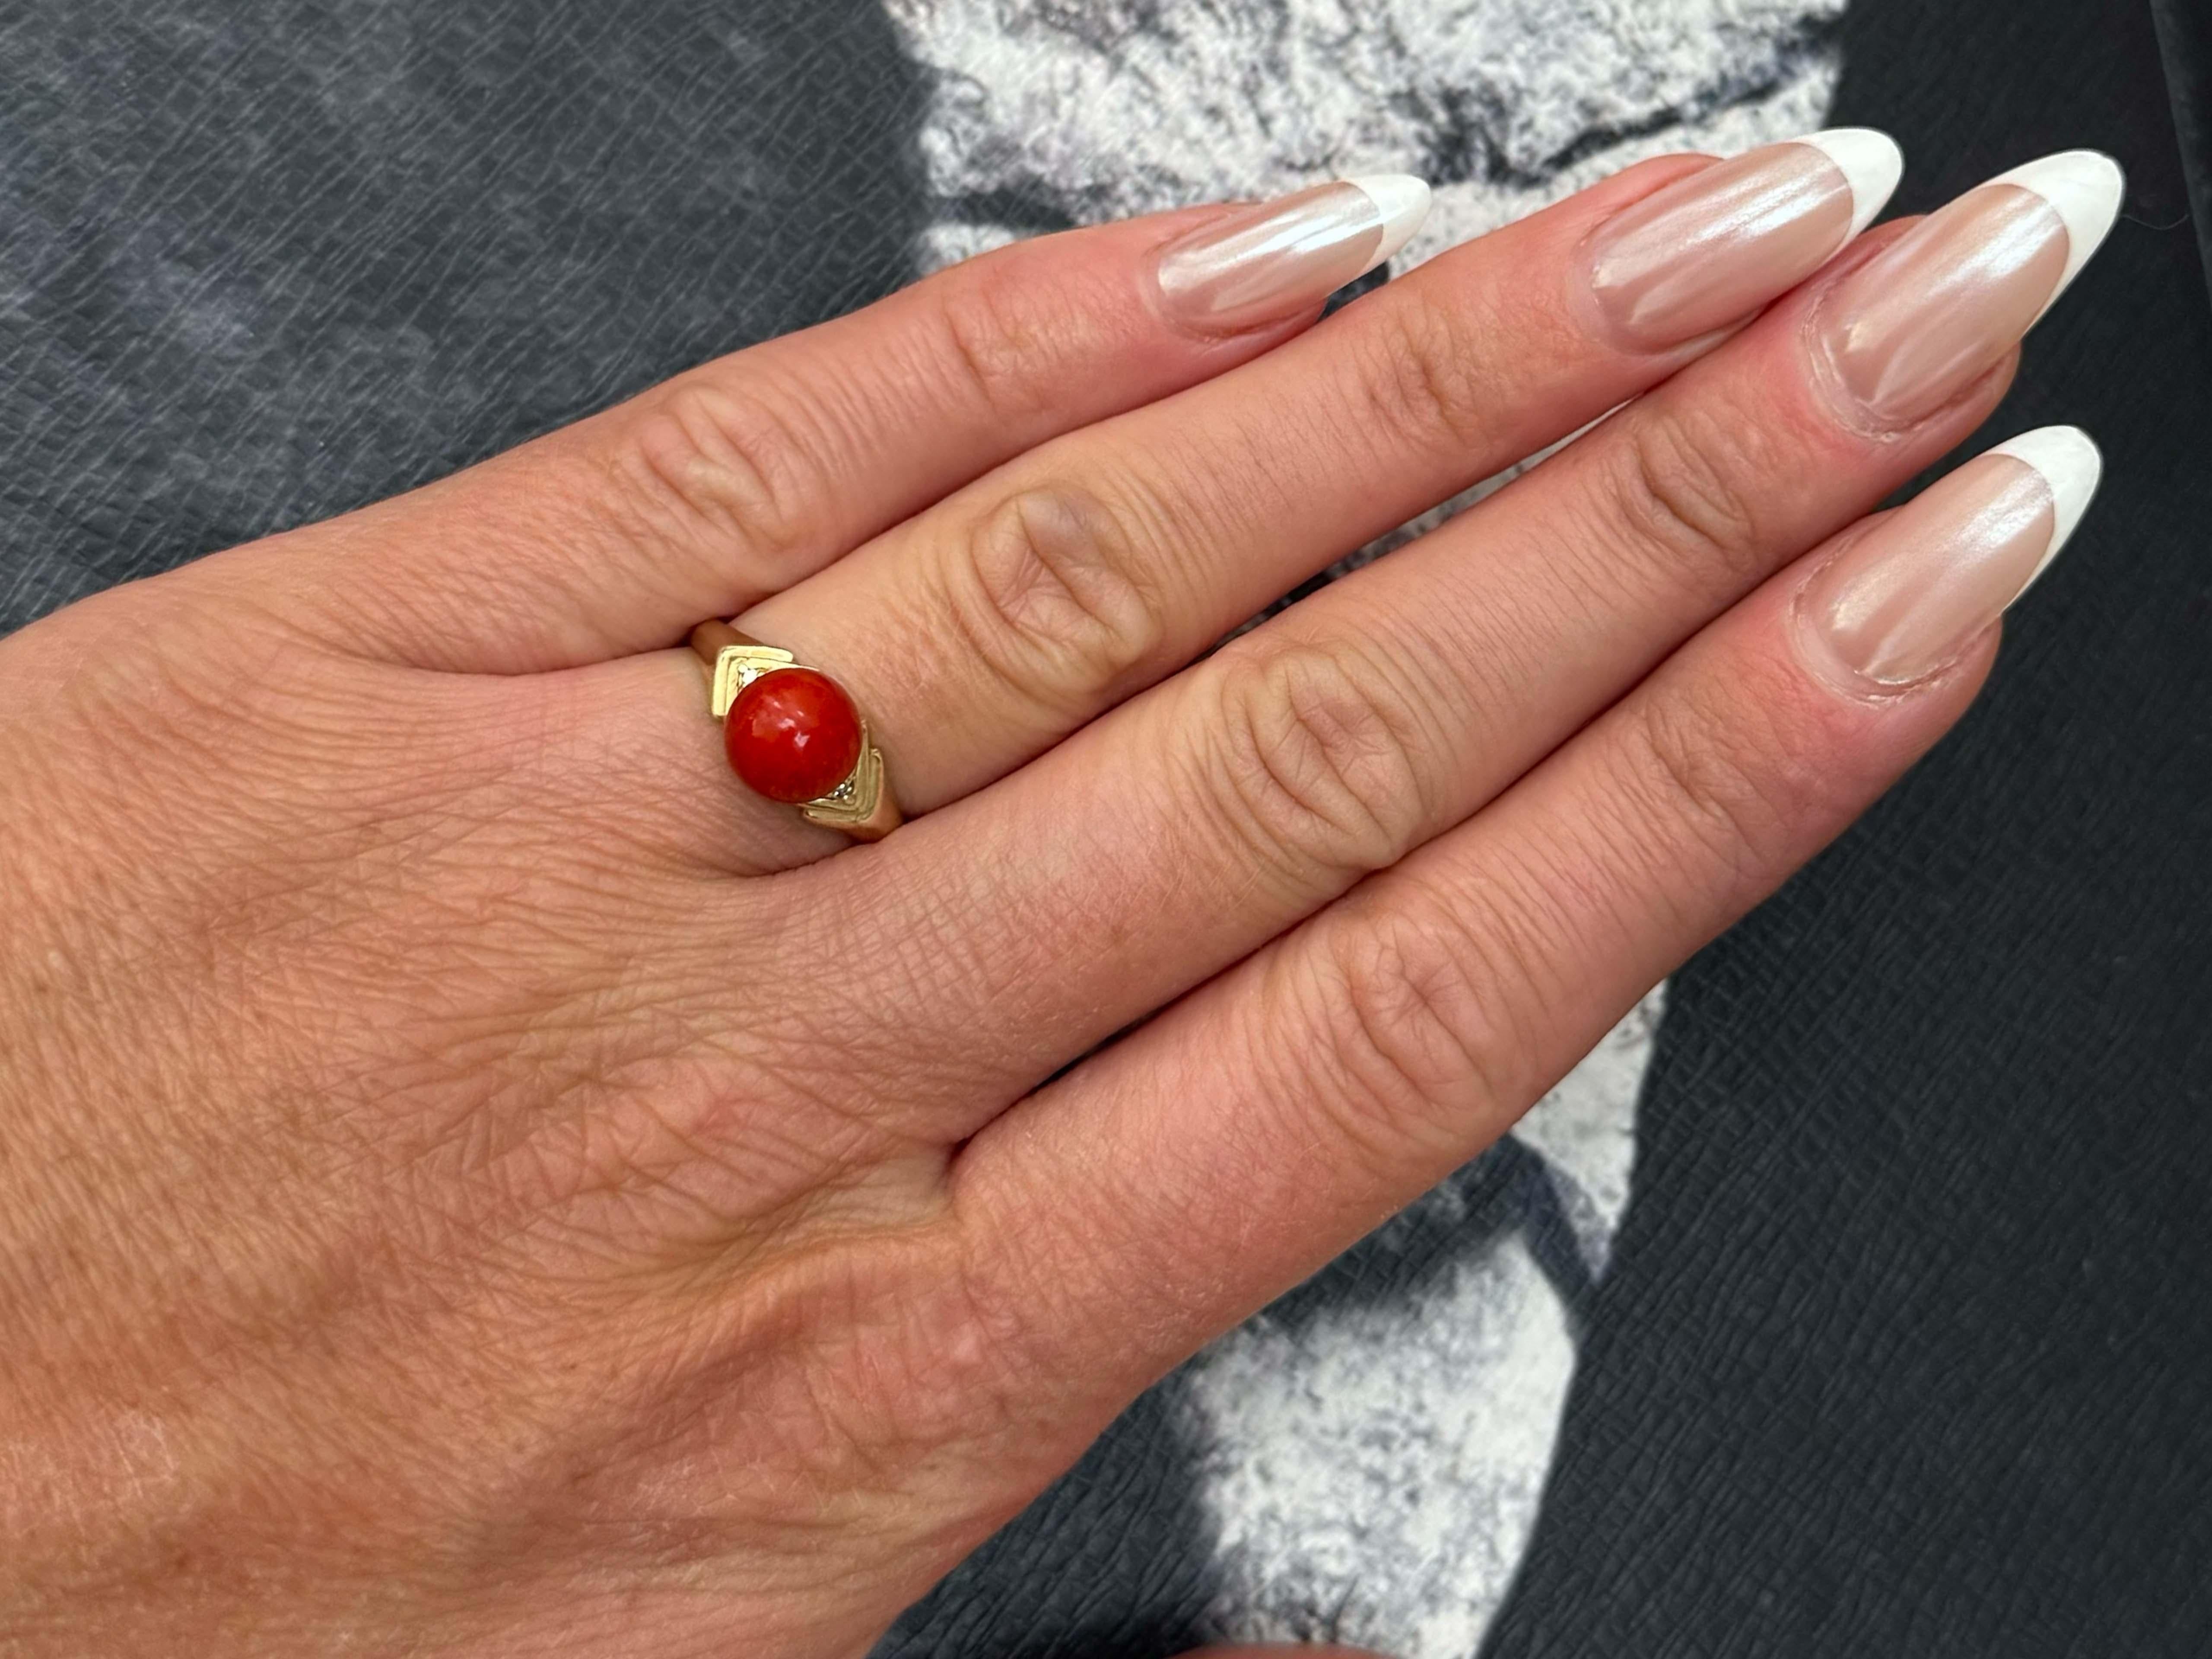 Item Specifications:

Metal: 14K Yellow Gold

Ring Size: 6.25 (resizing available for a fee)

Total Weight: 2.9 Grams

Aka Coral Specifications:

Shape: Sphere

Coral Diameter: 8 mm

Diamond Count: 2 round brilliant cut 

Diamond Color: J-K

Diamond